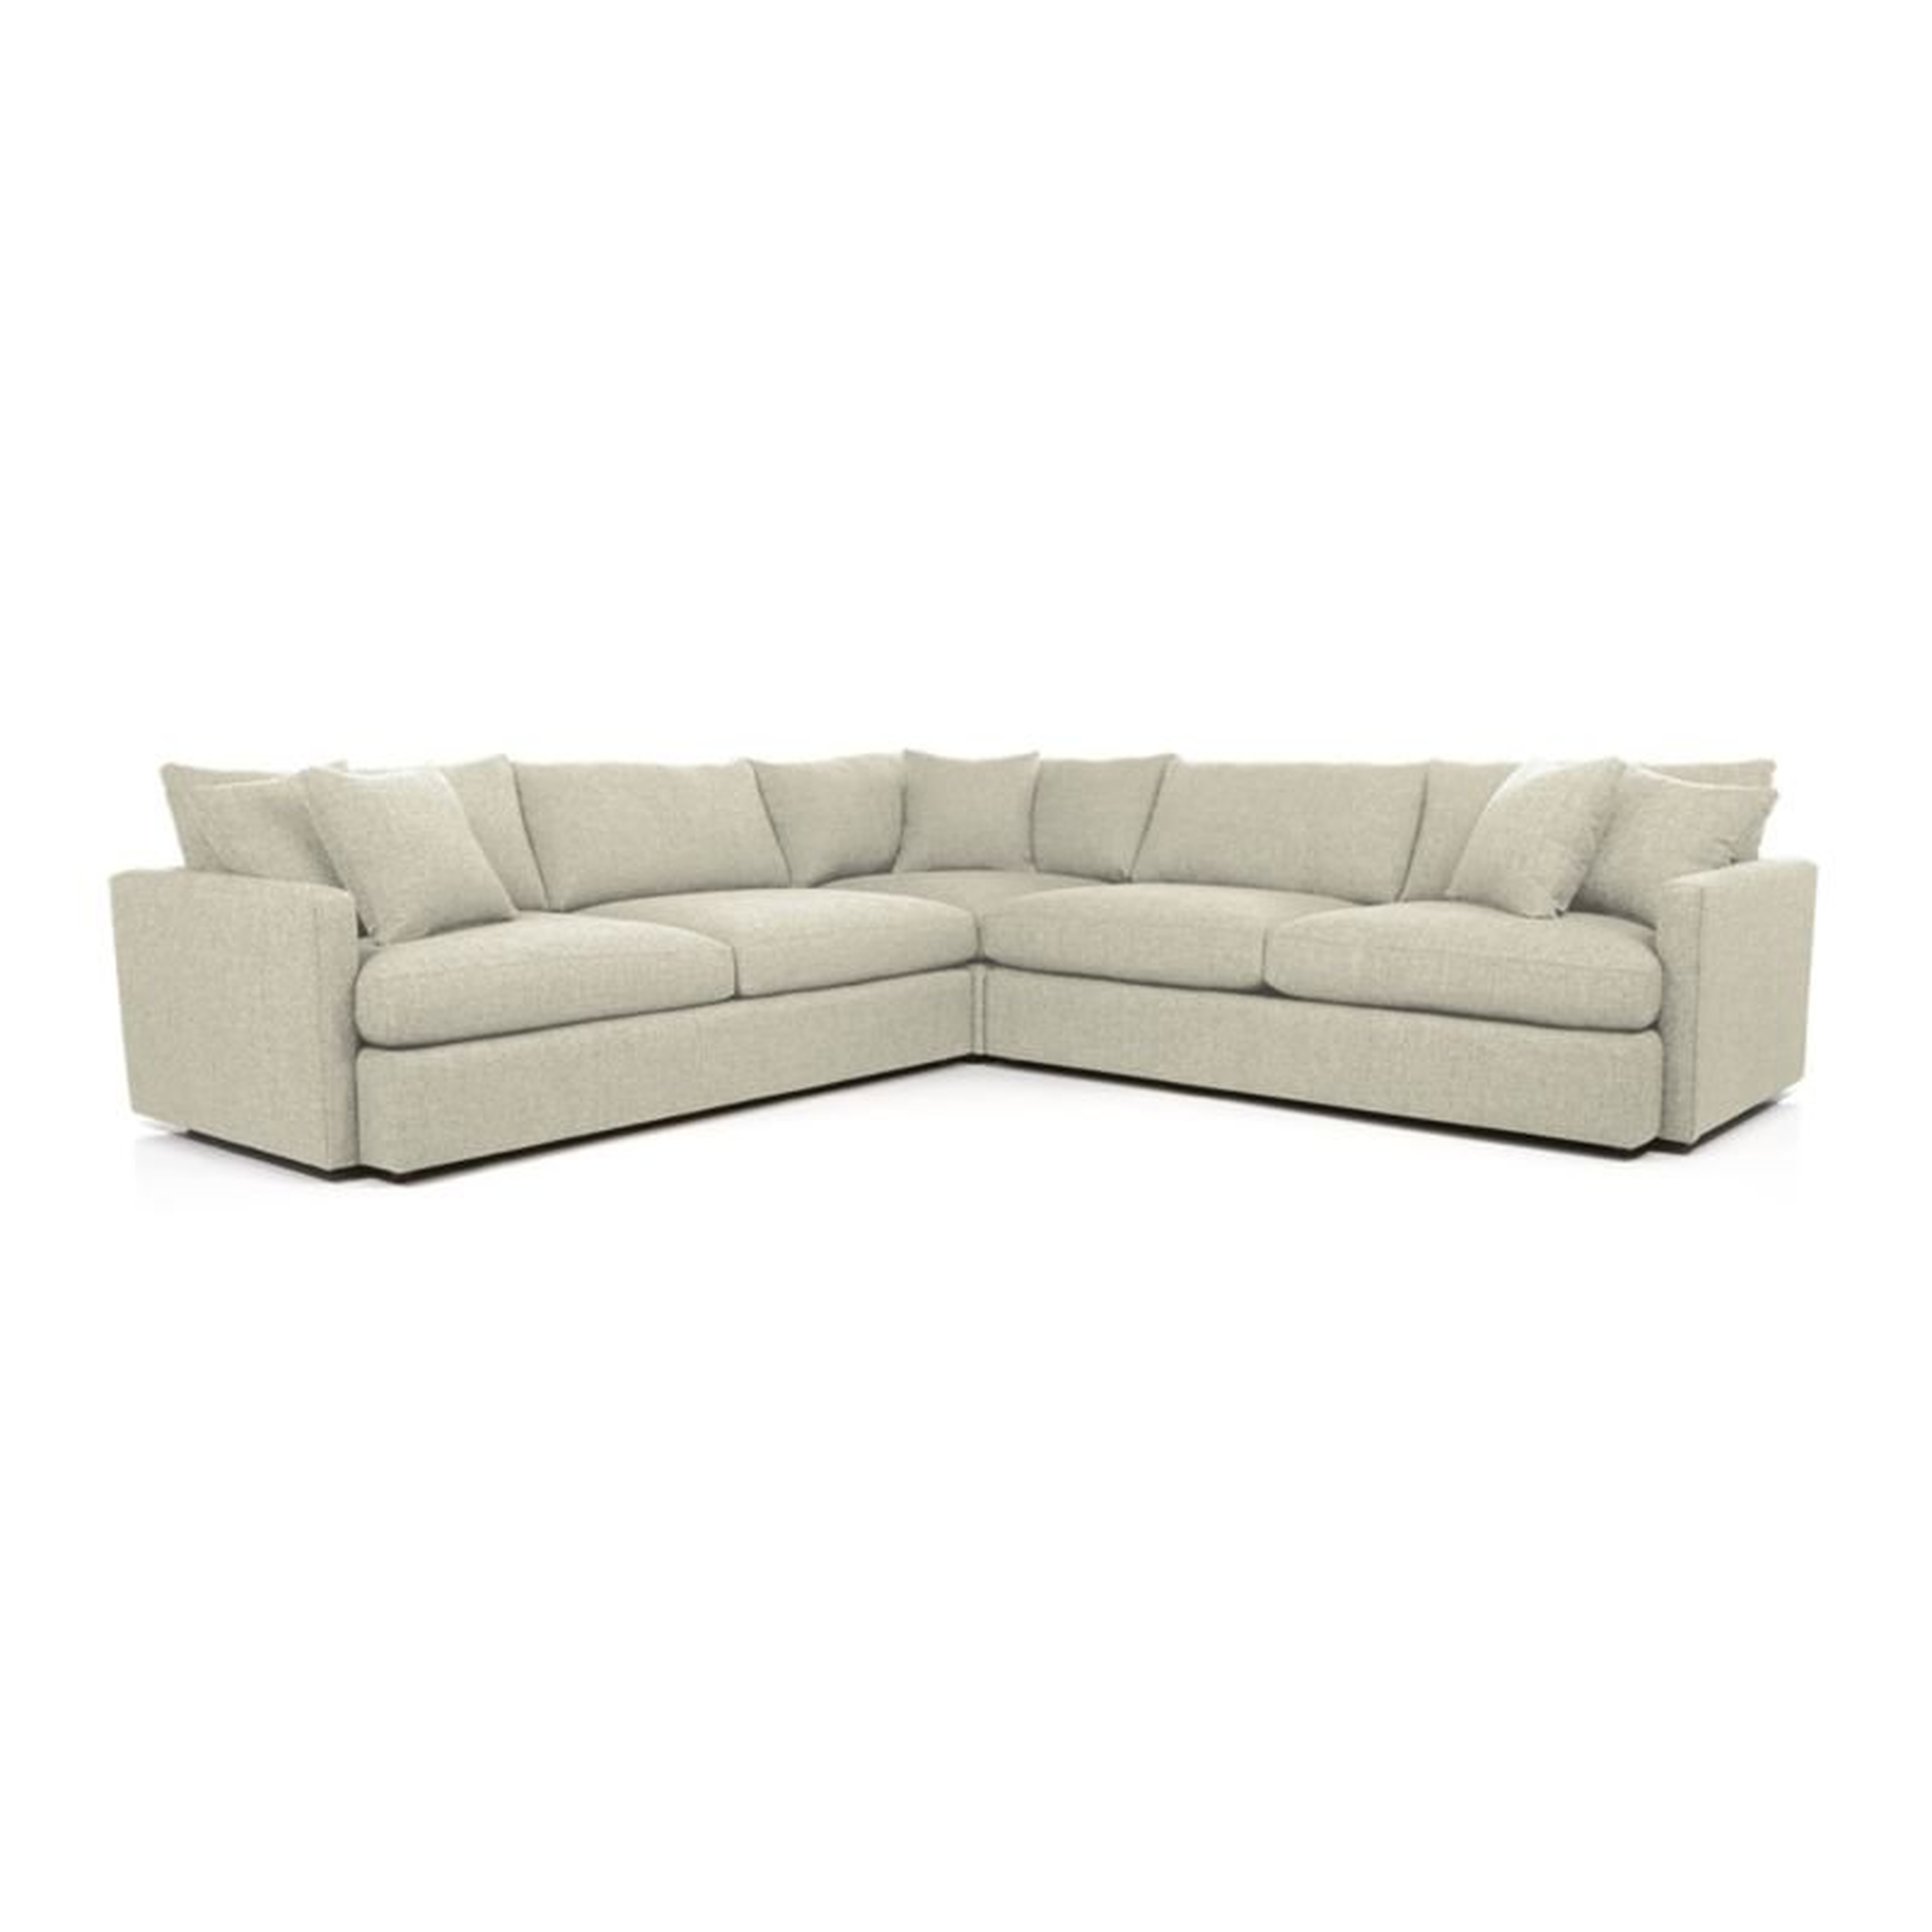 Lounge Deep 3-Piece Sectional Sofa - Taft Cement- Purchase now and we'll ship when it's available. Estimated in early March. - Crate and Barrel